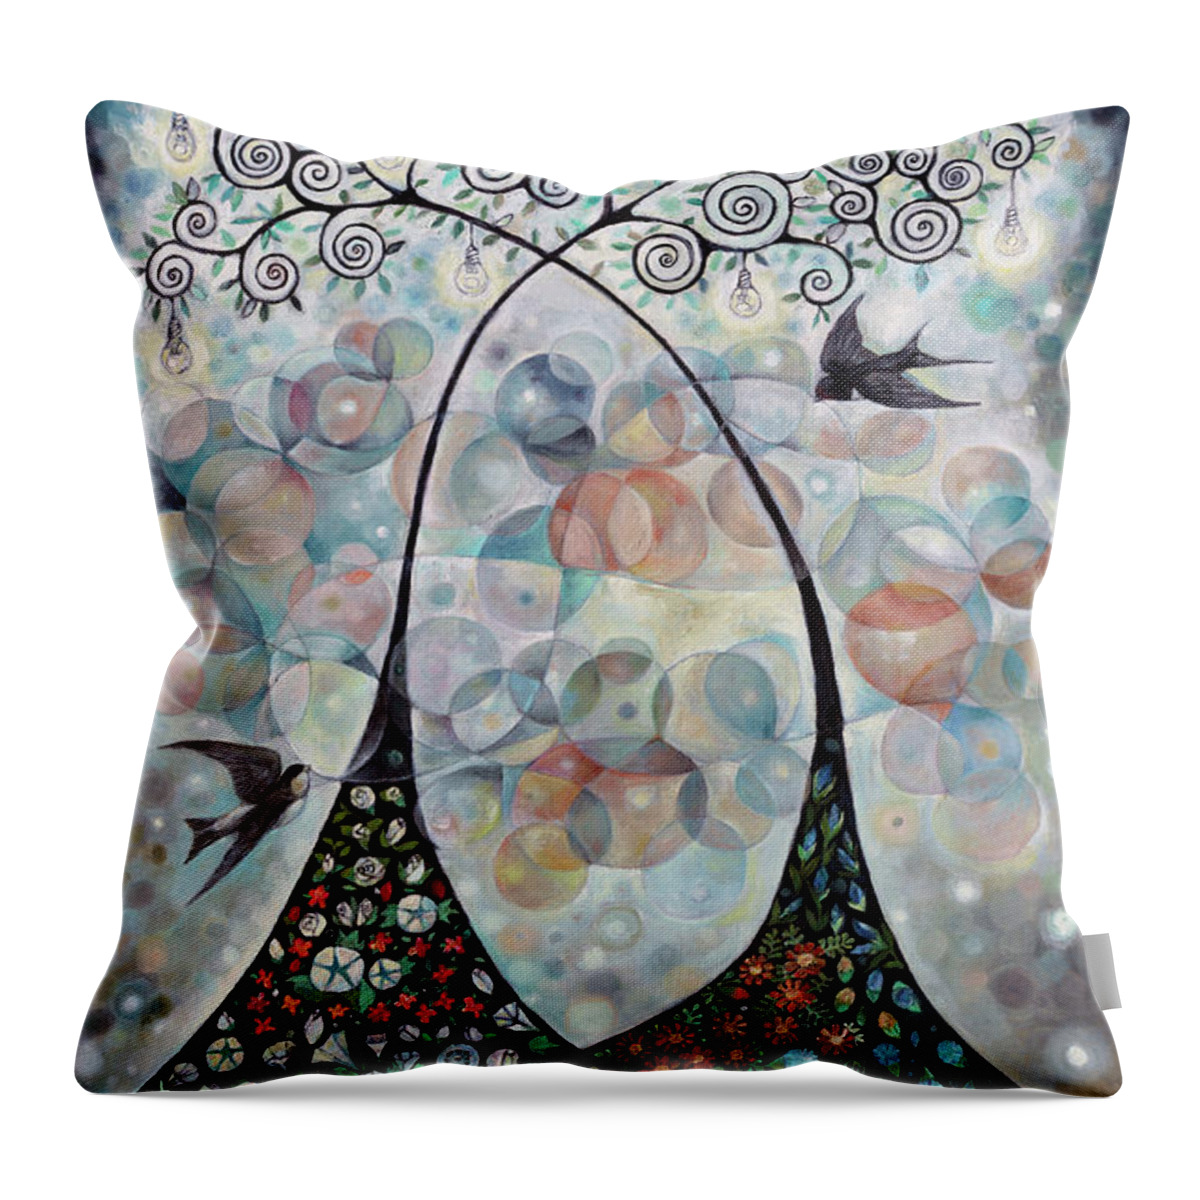 Birds Throw Pillow featuring the painting Infinity by Manami Lingerfelt